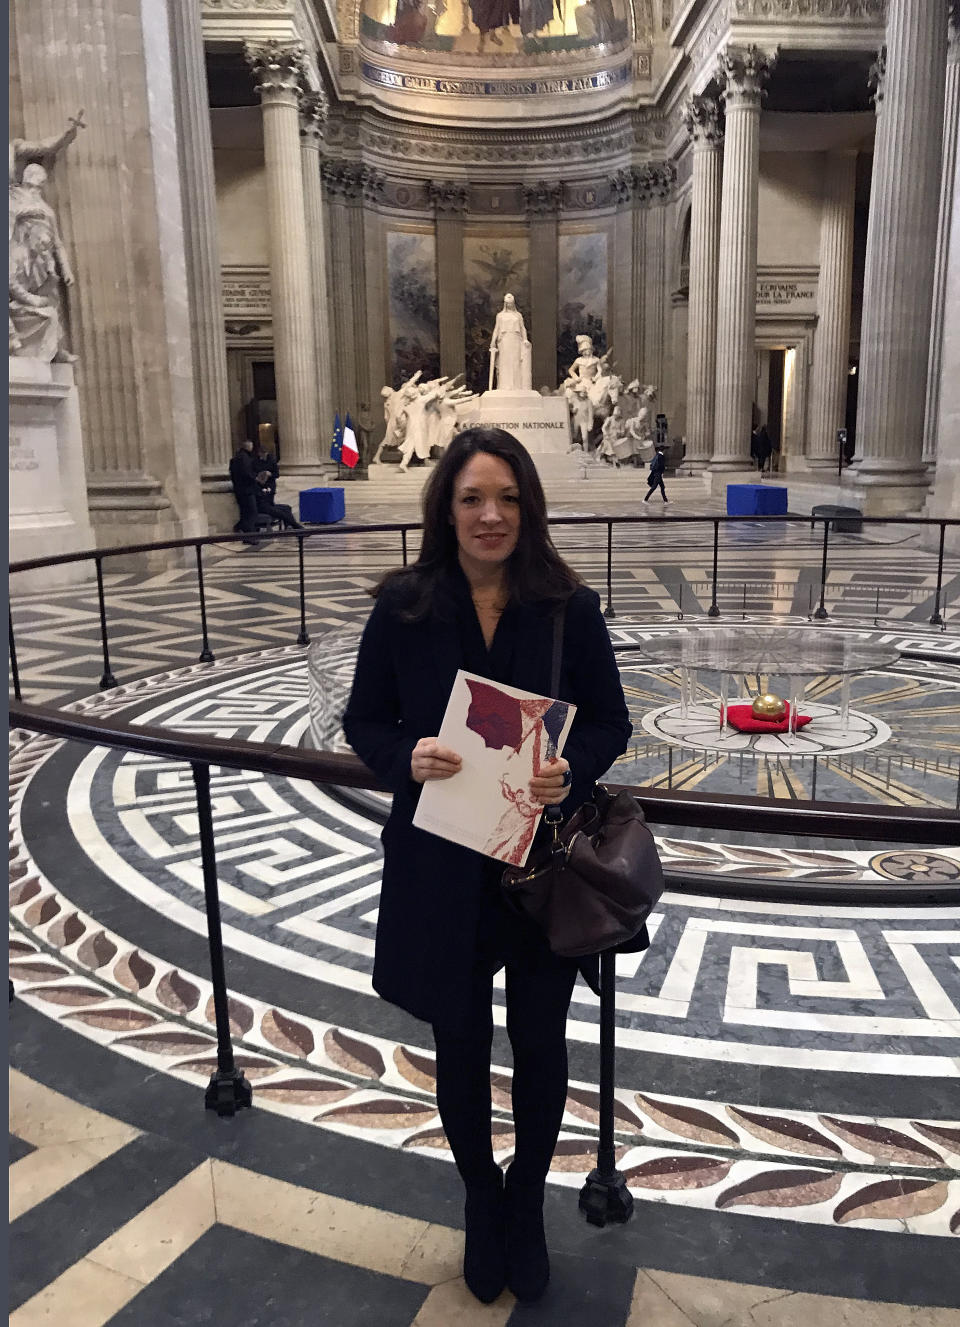 Britain's Catherine Norris Trent holds her document after a naturalization ceremony in Paris' Pantheon monument, Thursday, March 21, 2019. With the looming Brexit deadline, the 38-year-old mother of two who's lived in the French capital for over a decade was one of dozens of newly-minted French nationals attending the ceremony. (AP Photo/Thomas Admason)